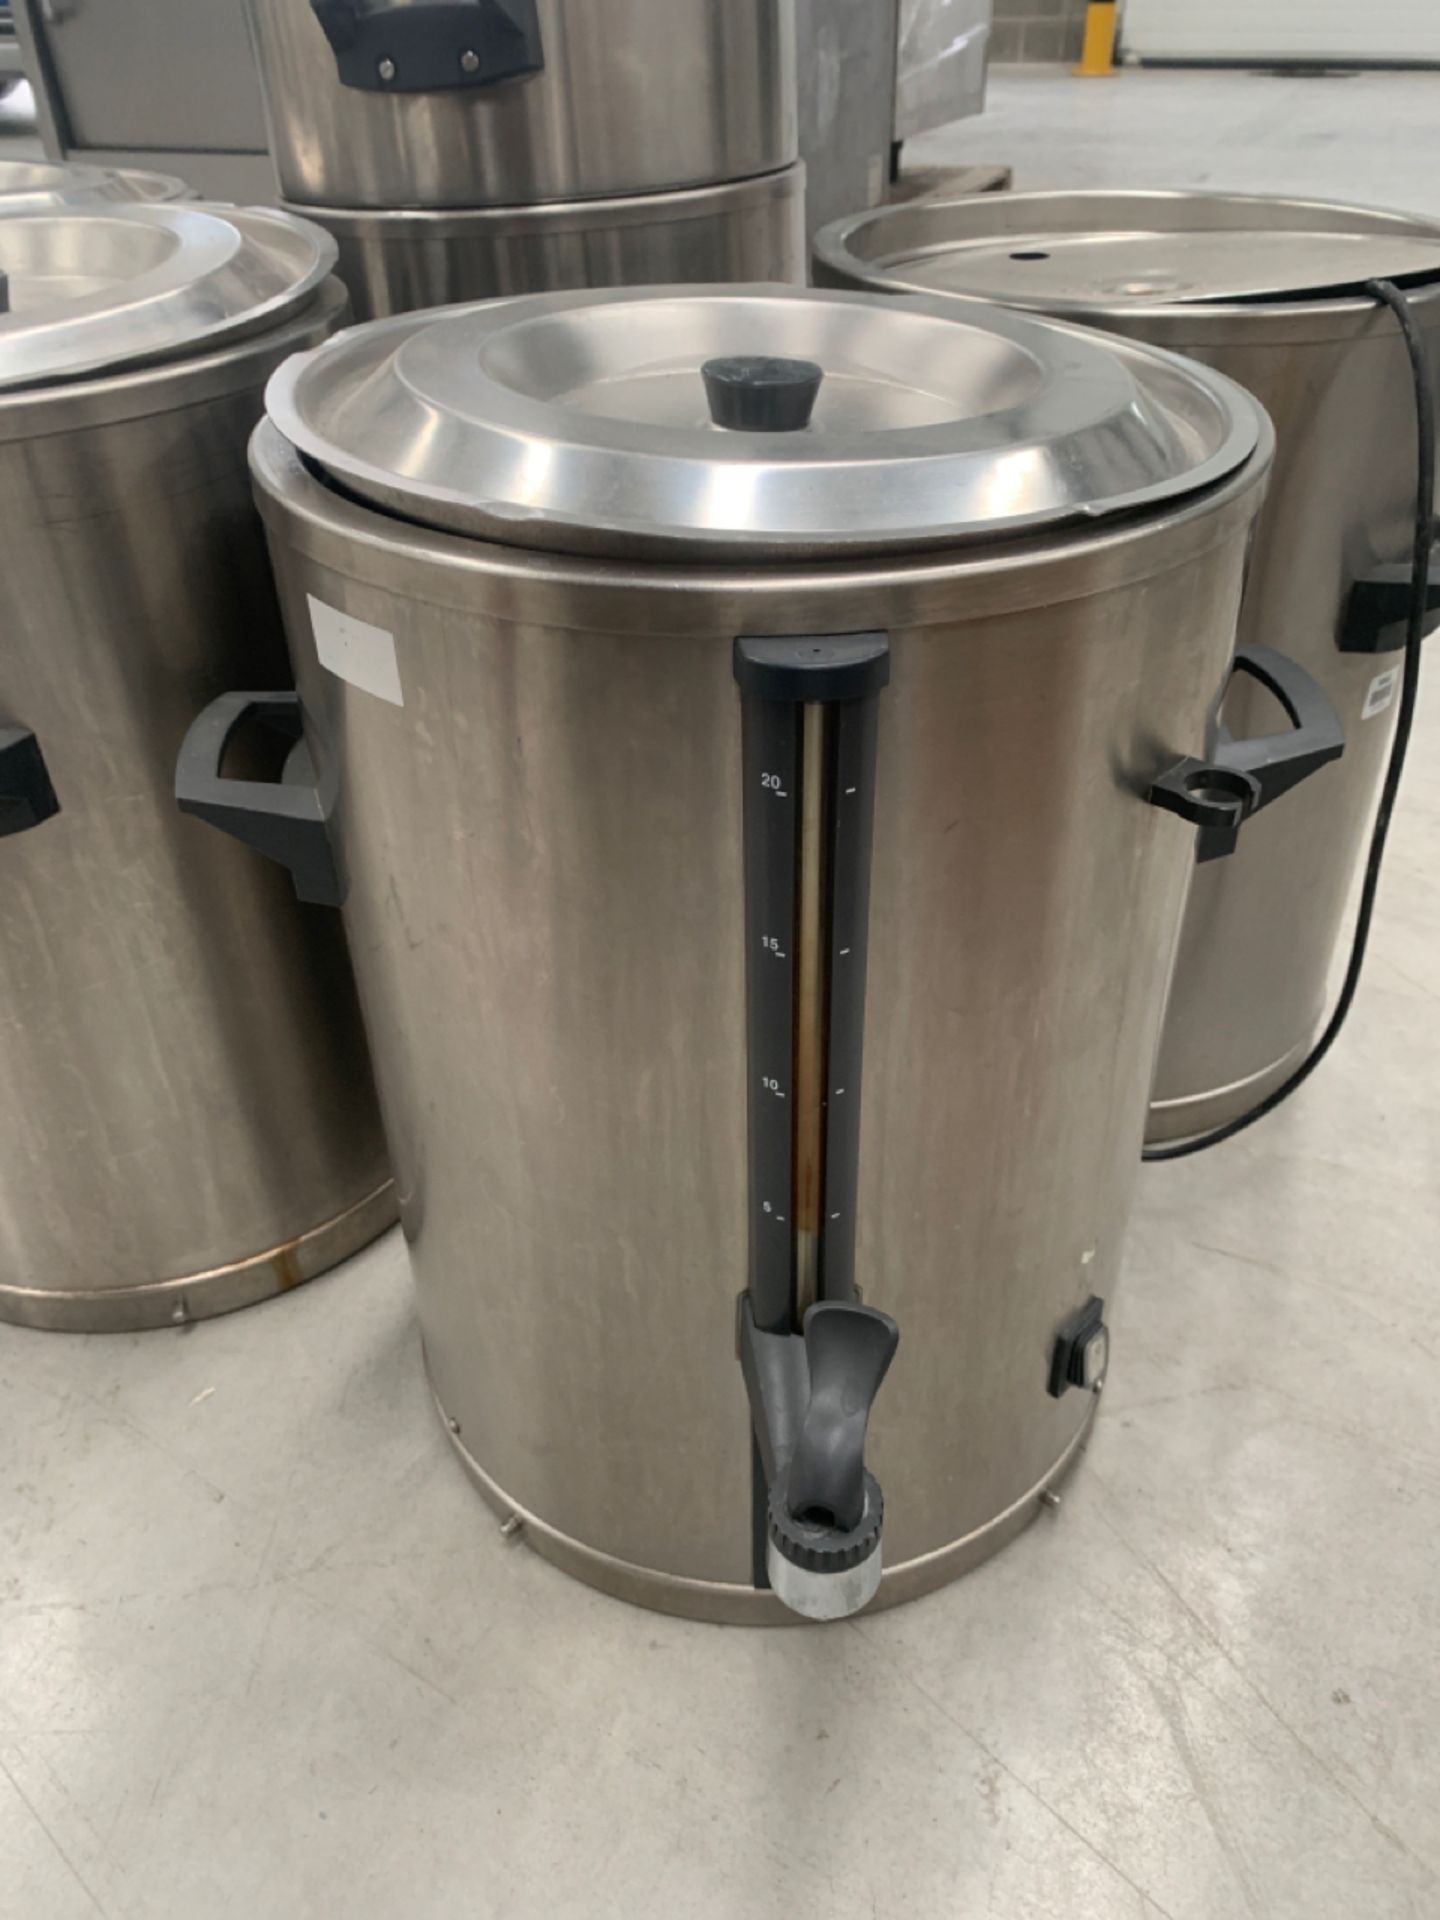 Set of 5 Stainless Steel Thermostatically Controlled 20L Coffee Containers - Image 4 of 5